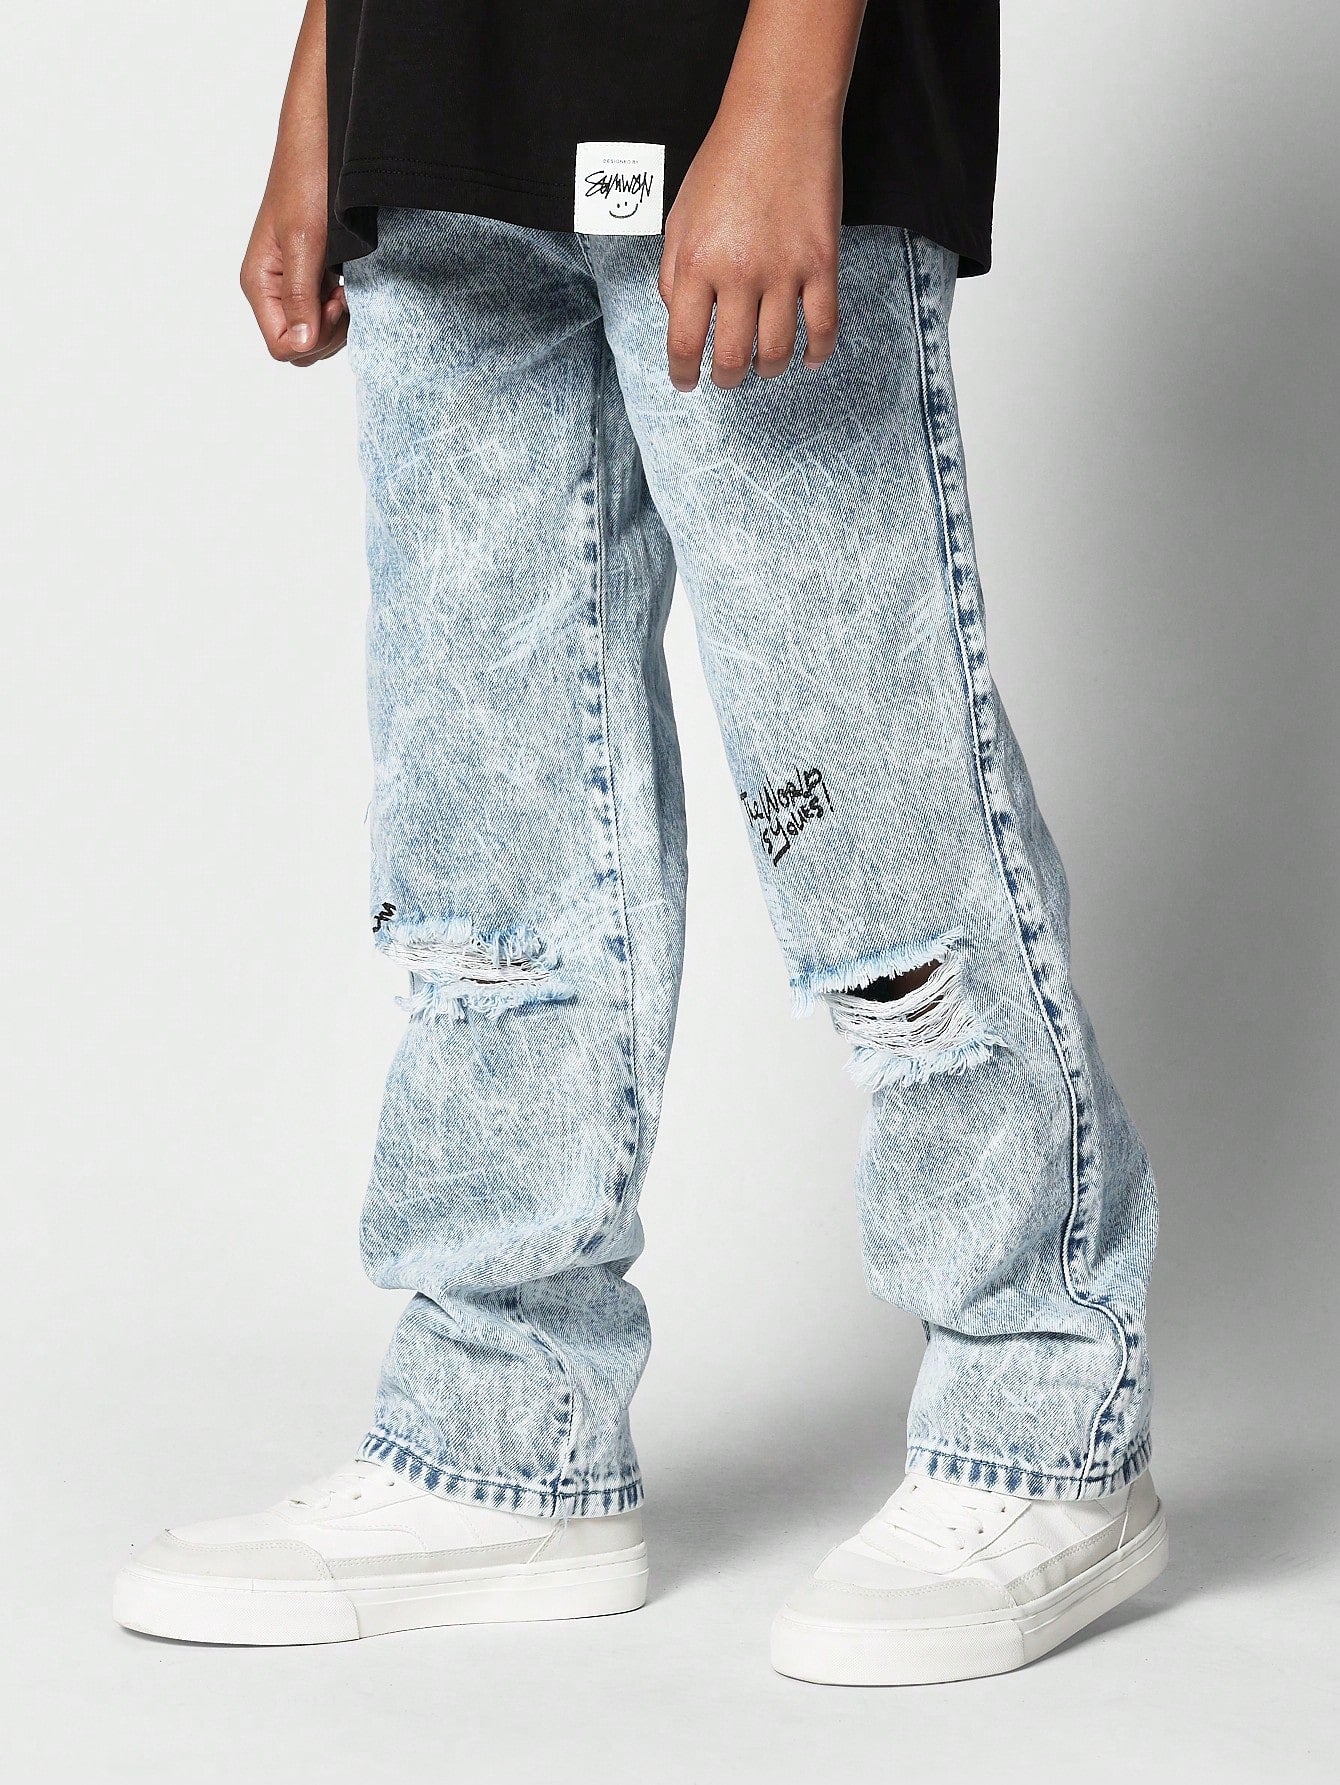 Kids Unisex Loose Fit Washed Distressed Jeans With All Doodle Print Back To School